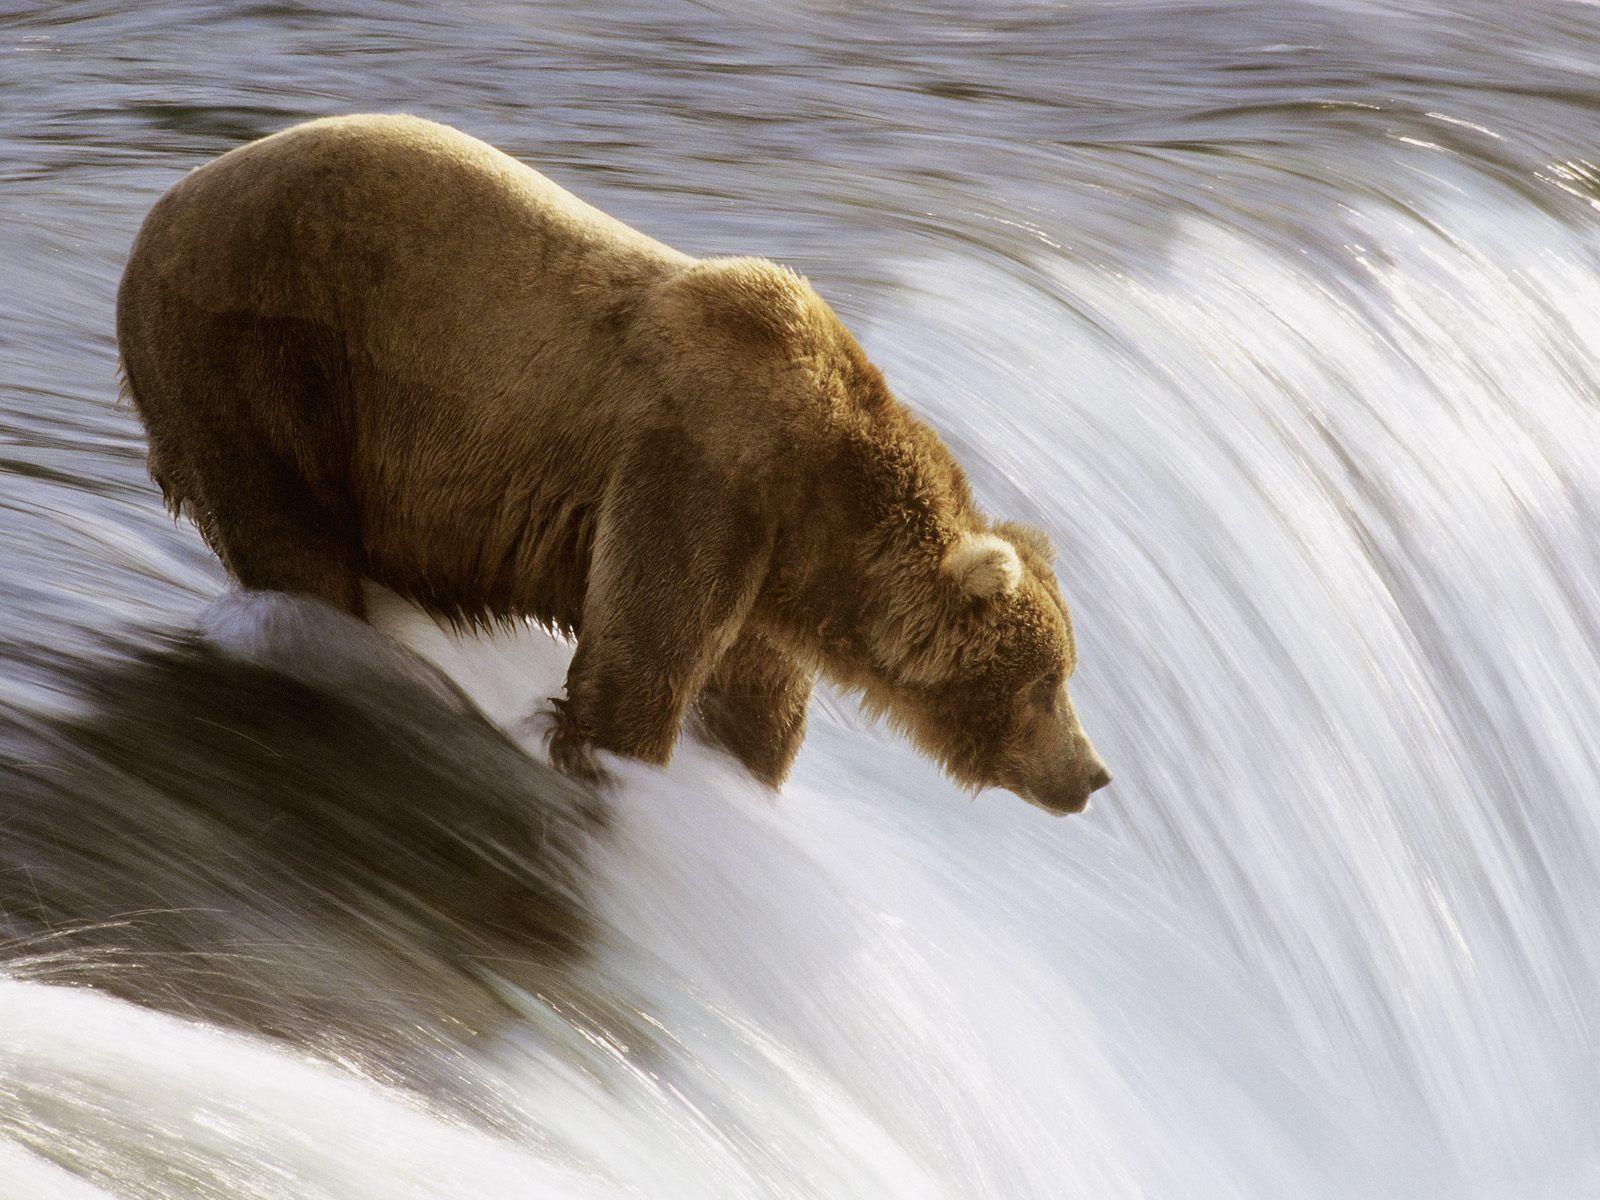 Grizzly Fishing Wallpaper Bears Animals Wallpaper in jpg format